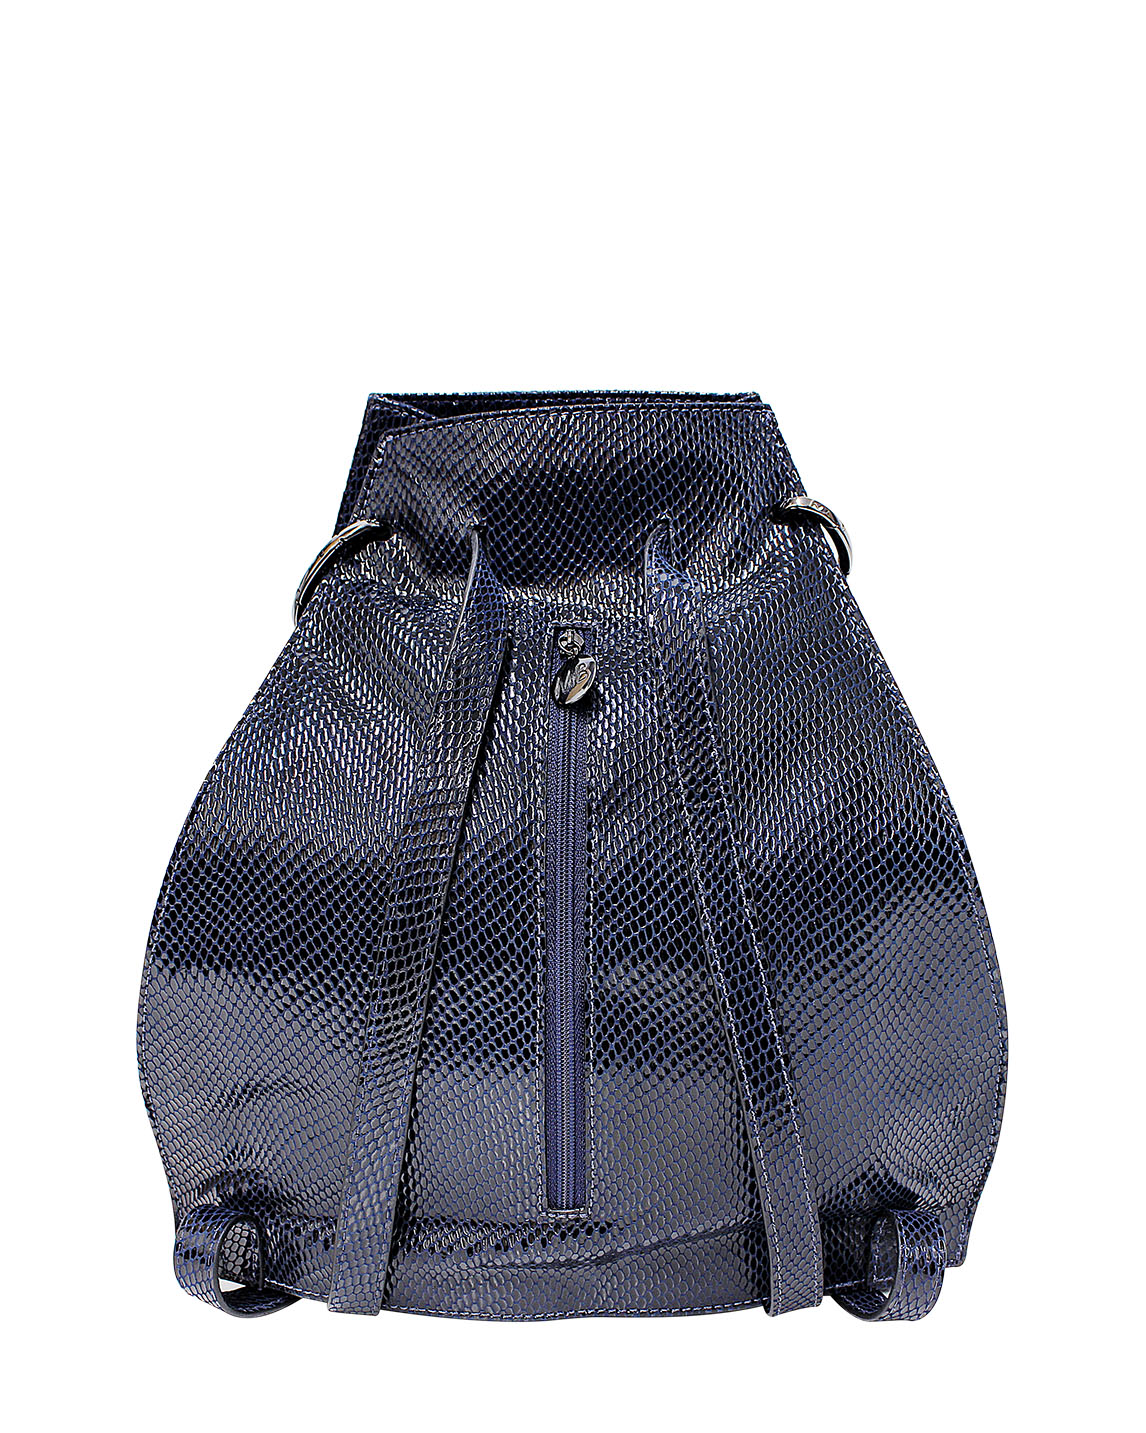 Cartera Backpack DS-2340 Color Azul